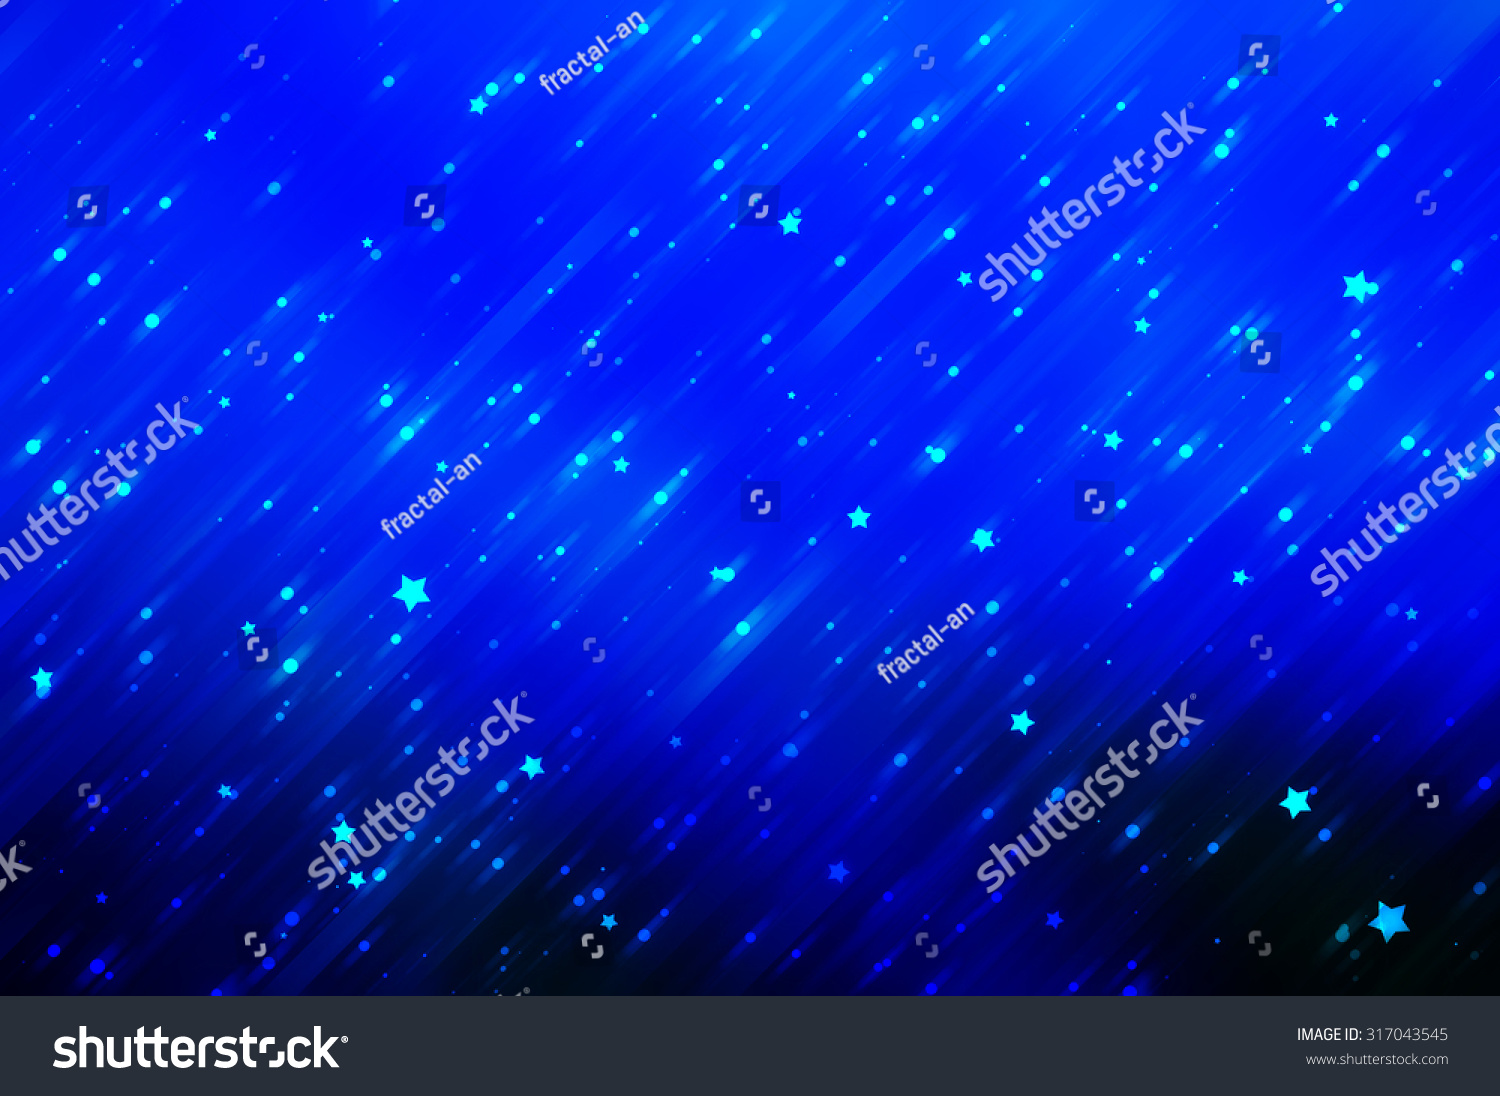 Blue Bright Abstract Background With Stars Stock Photo 317043545 ...